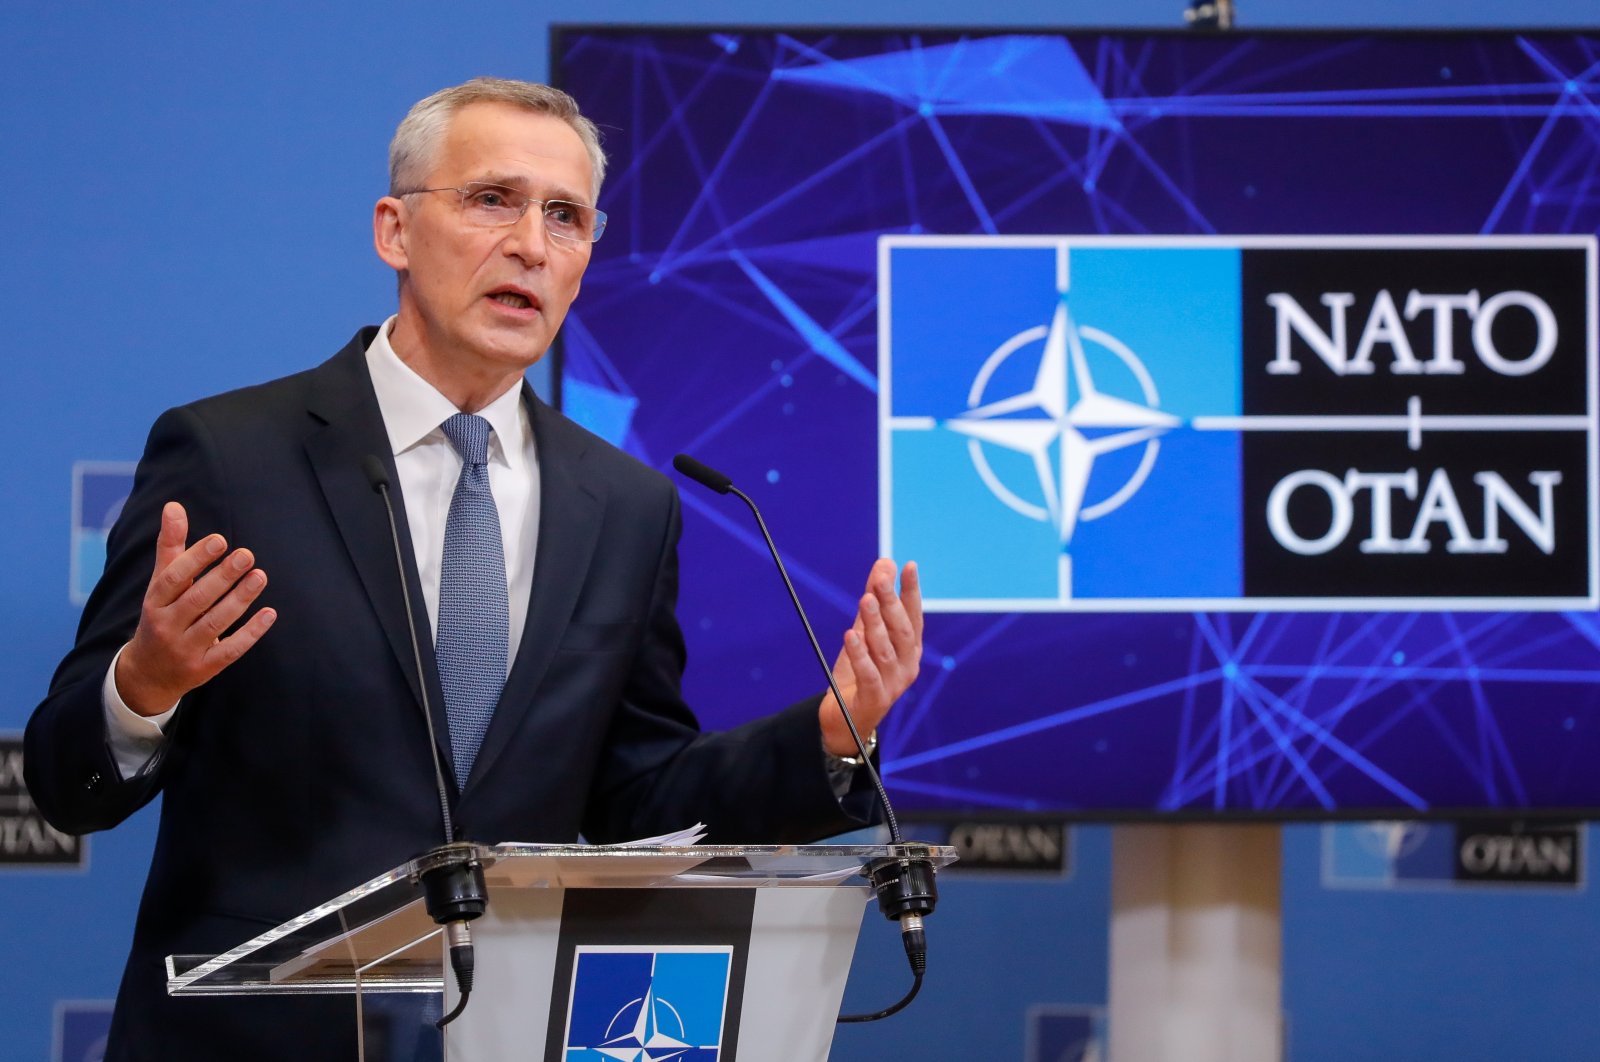 NATO Secretary-General Jens Stoltenberg gives a press conference at the end of an extraordinary virtual summit of NATO heads of state and government on the security situation in and around Ukraine, at the NATO headquarters in Brussels, Belgium, Feb. 25, 2022. (EPA Photo)